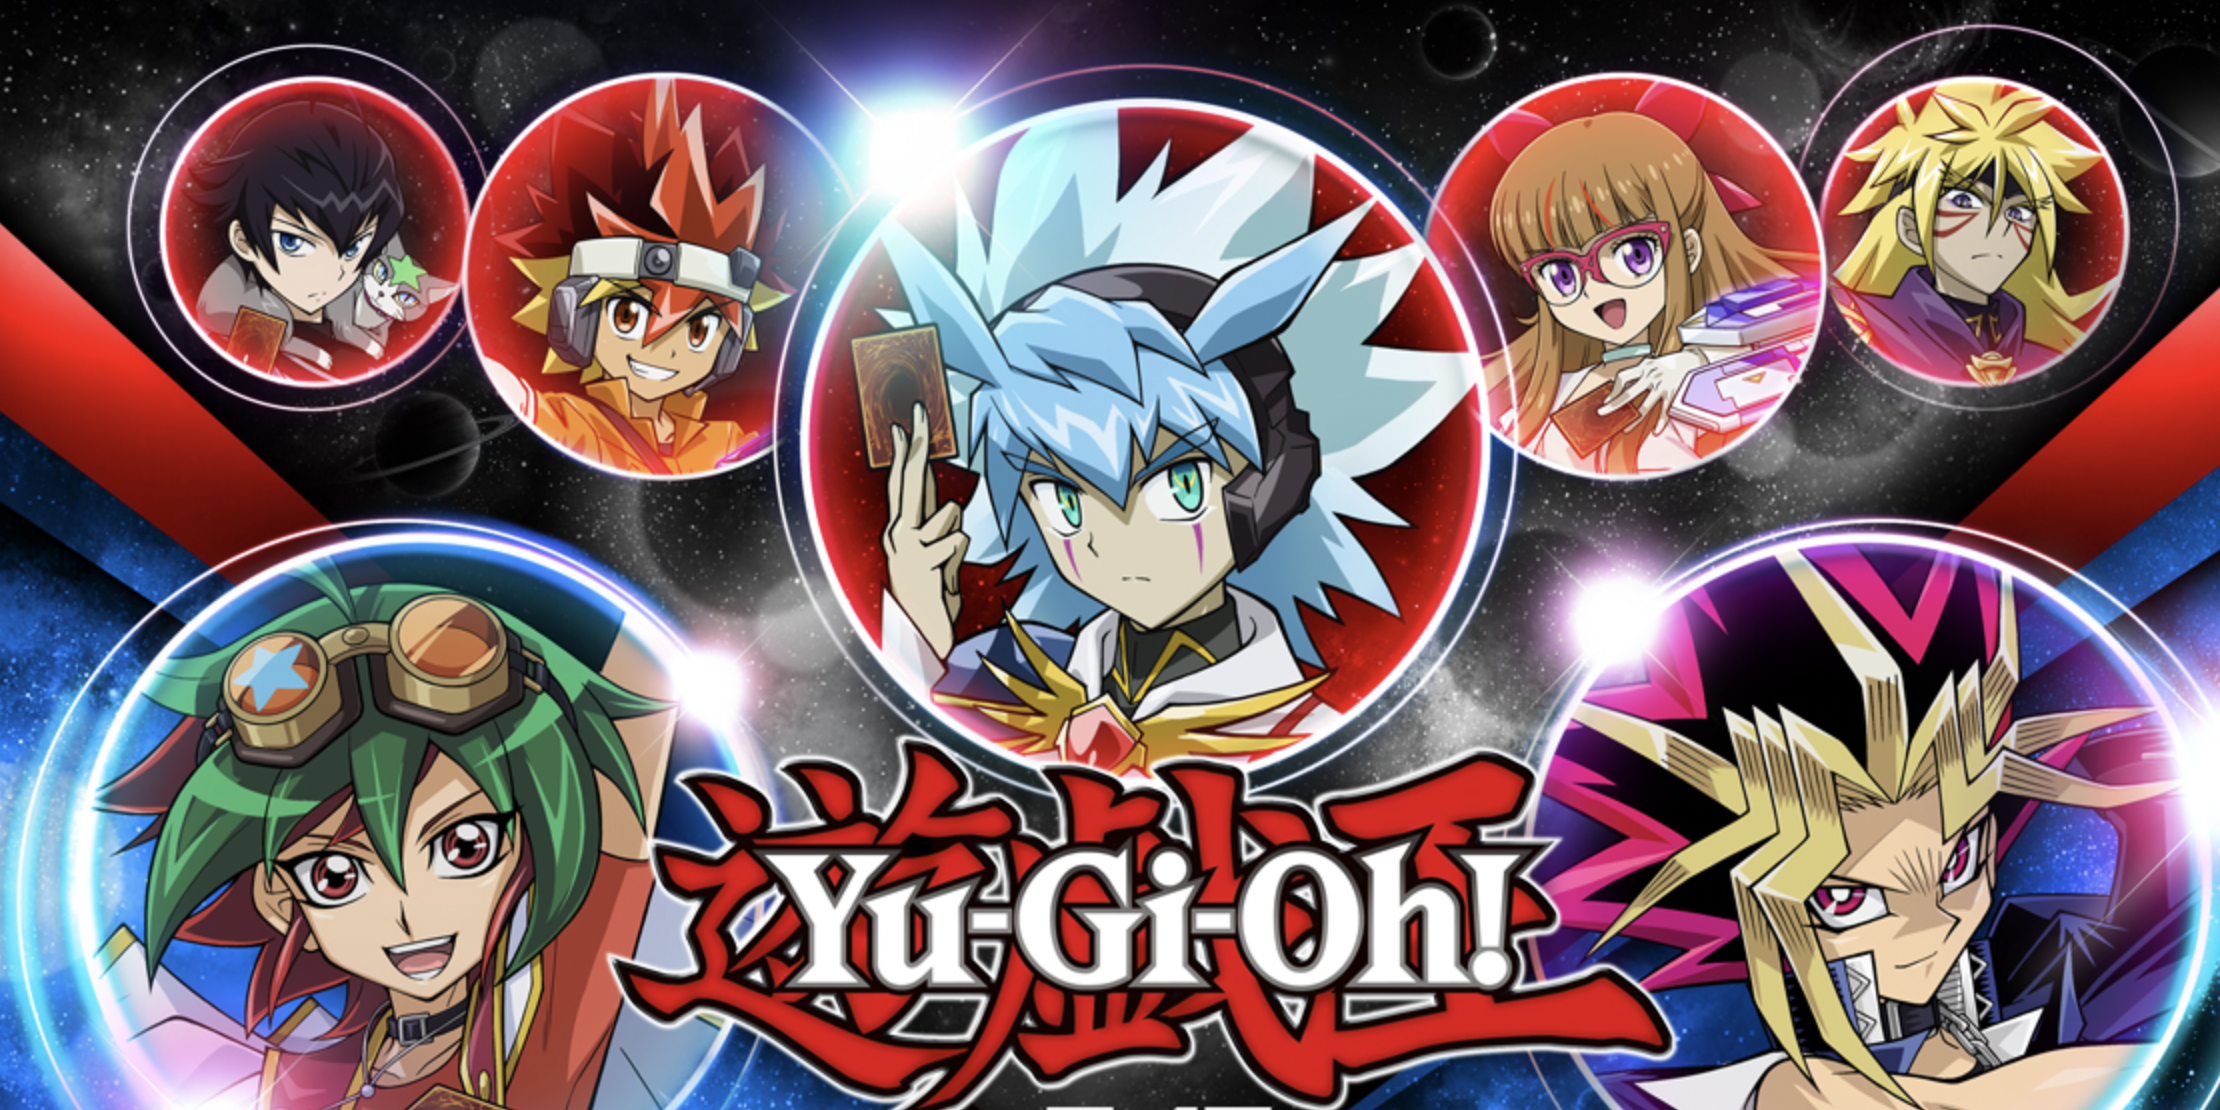 New Yu-Gi-Oh! Switch Game Has a Suitably Outrageous Title